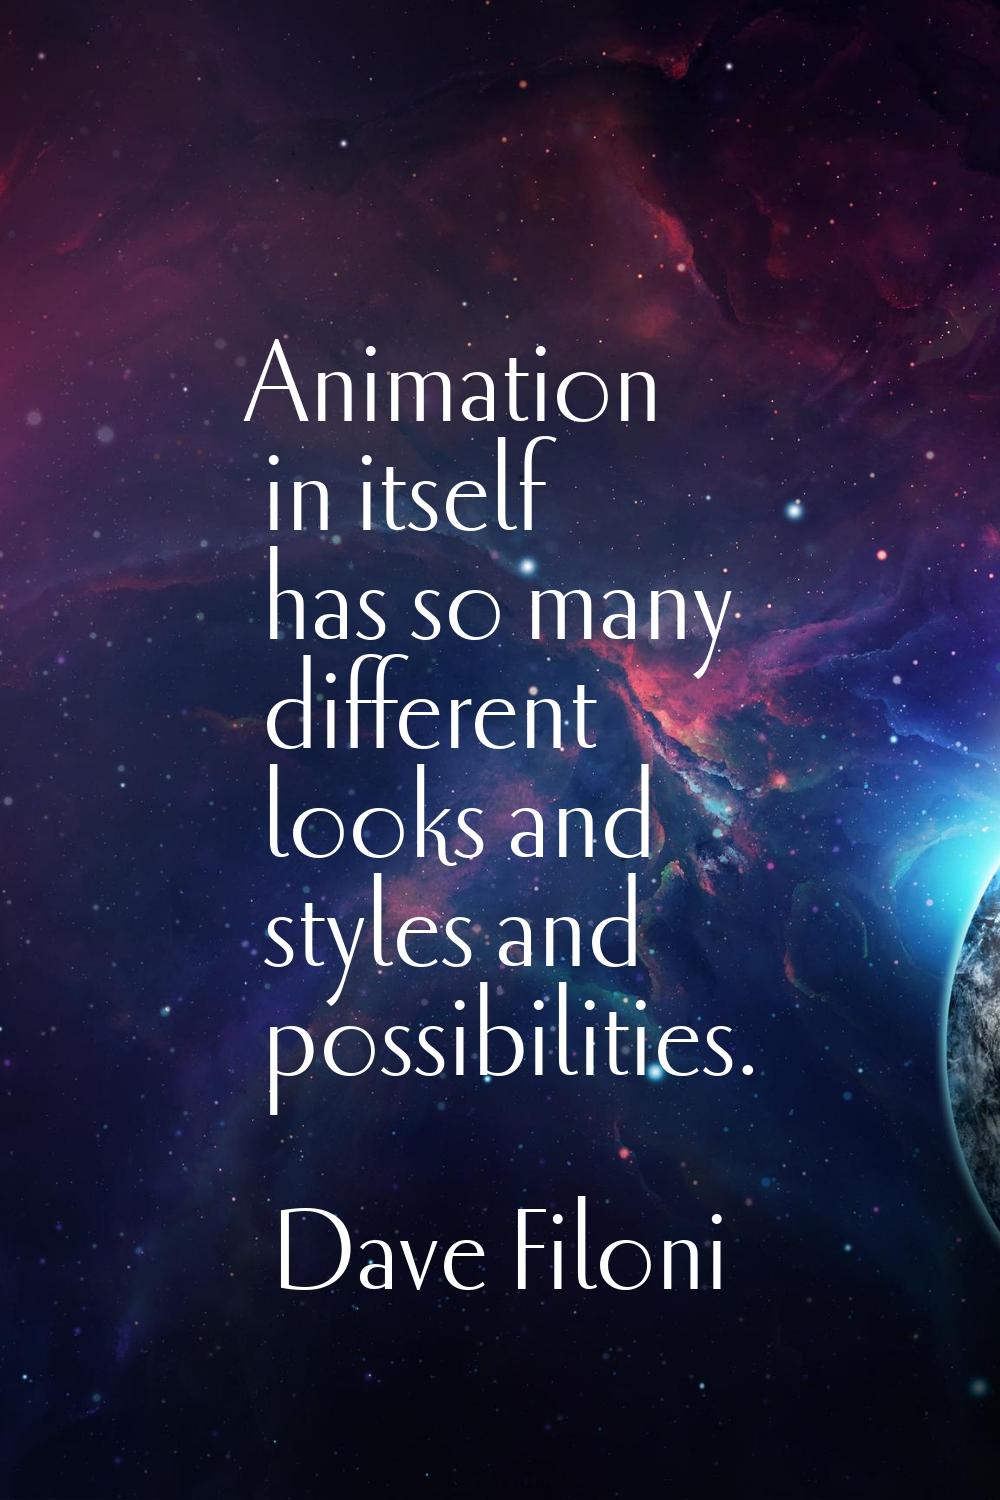 Animation in itself has so many different looks and styles and possibilities.